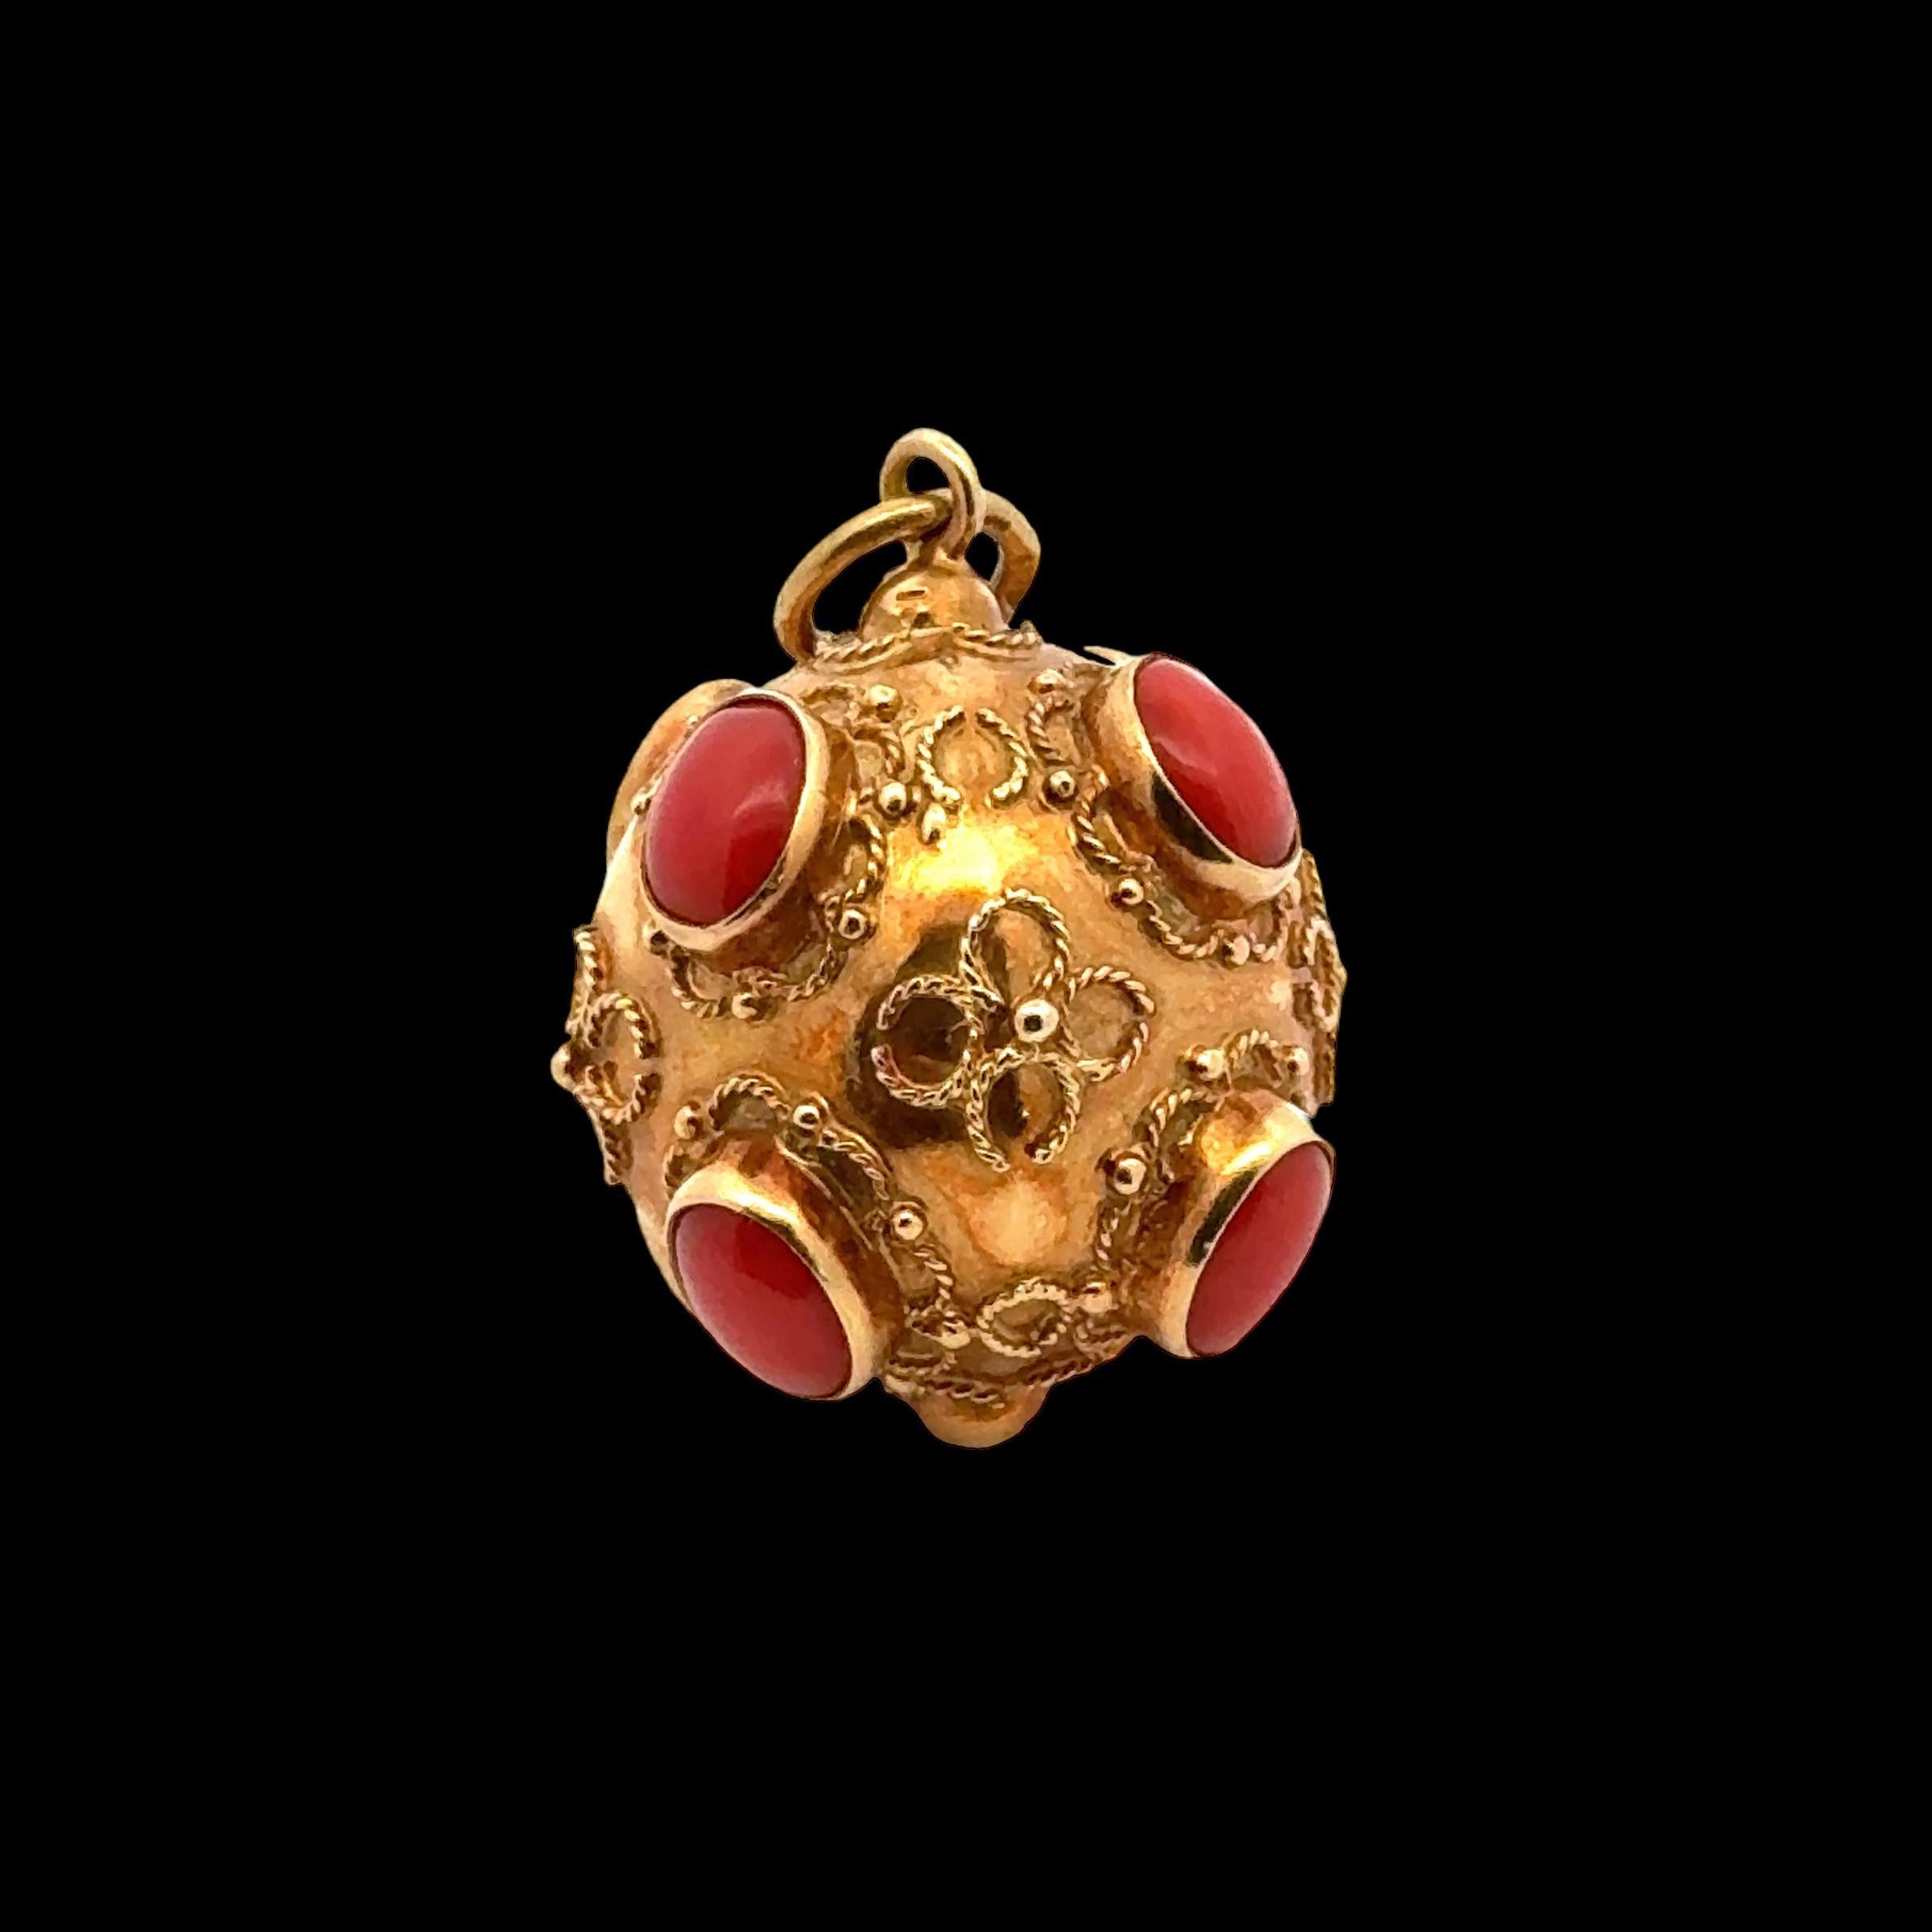 Beautiful Mid-20th Century Etruscan charm handcrafted in lustrous 18 karat yellow gold. The fob charm is accented with cabochon coral gemstones and the gold is enhanced wtih decoration and gold ribbon accents. The charm measures approximately an